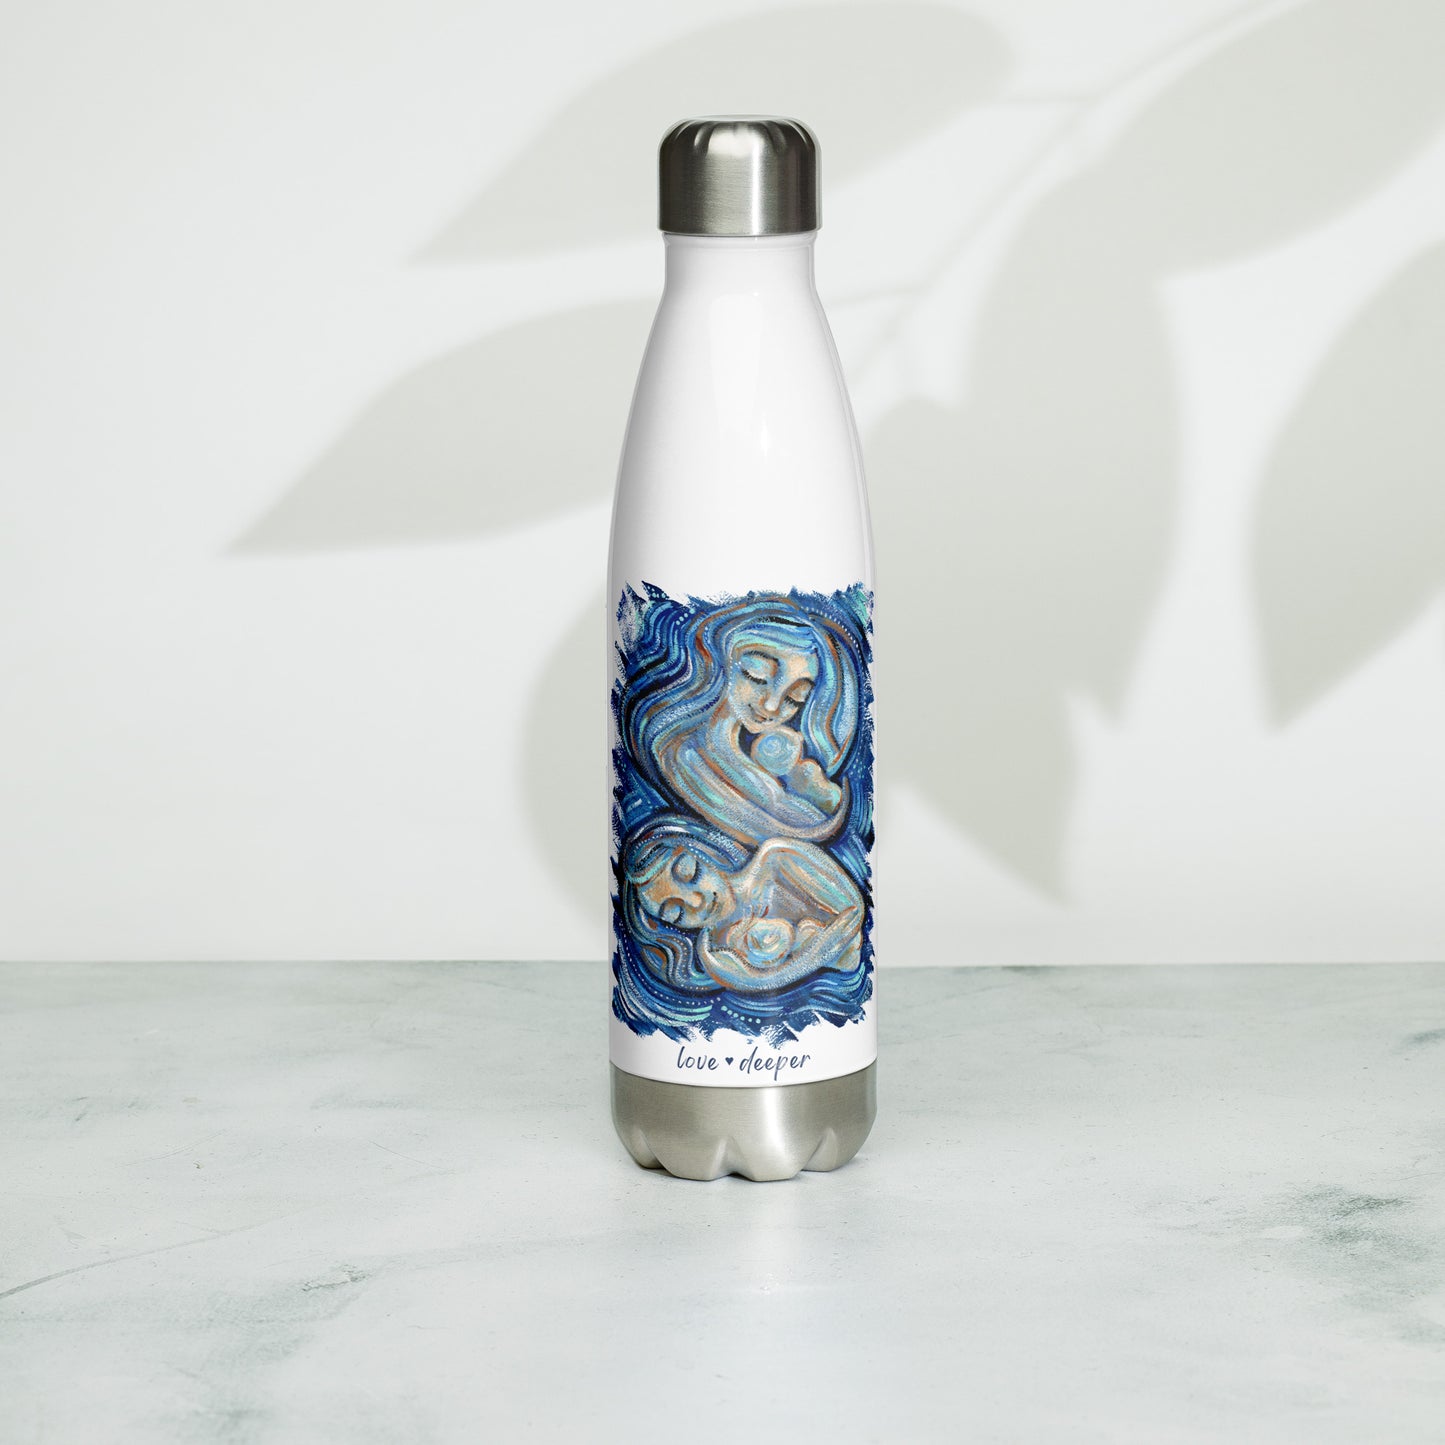 Mother Child Artsy Stainless Steel Water Bottle - 2 Paintings by KmBerggren